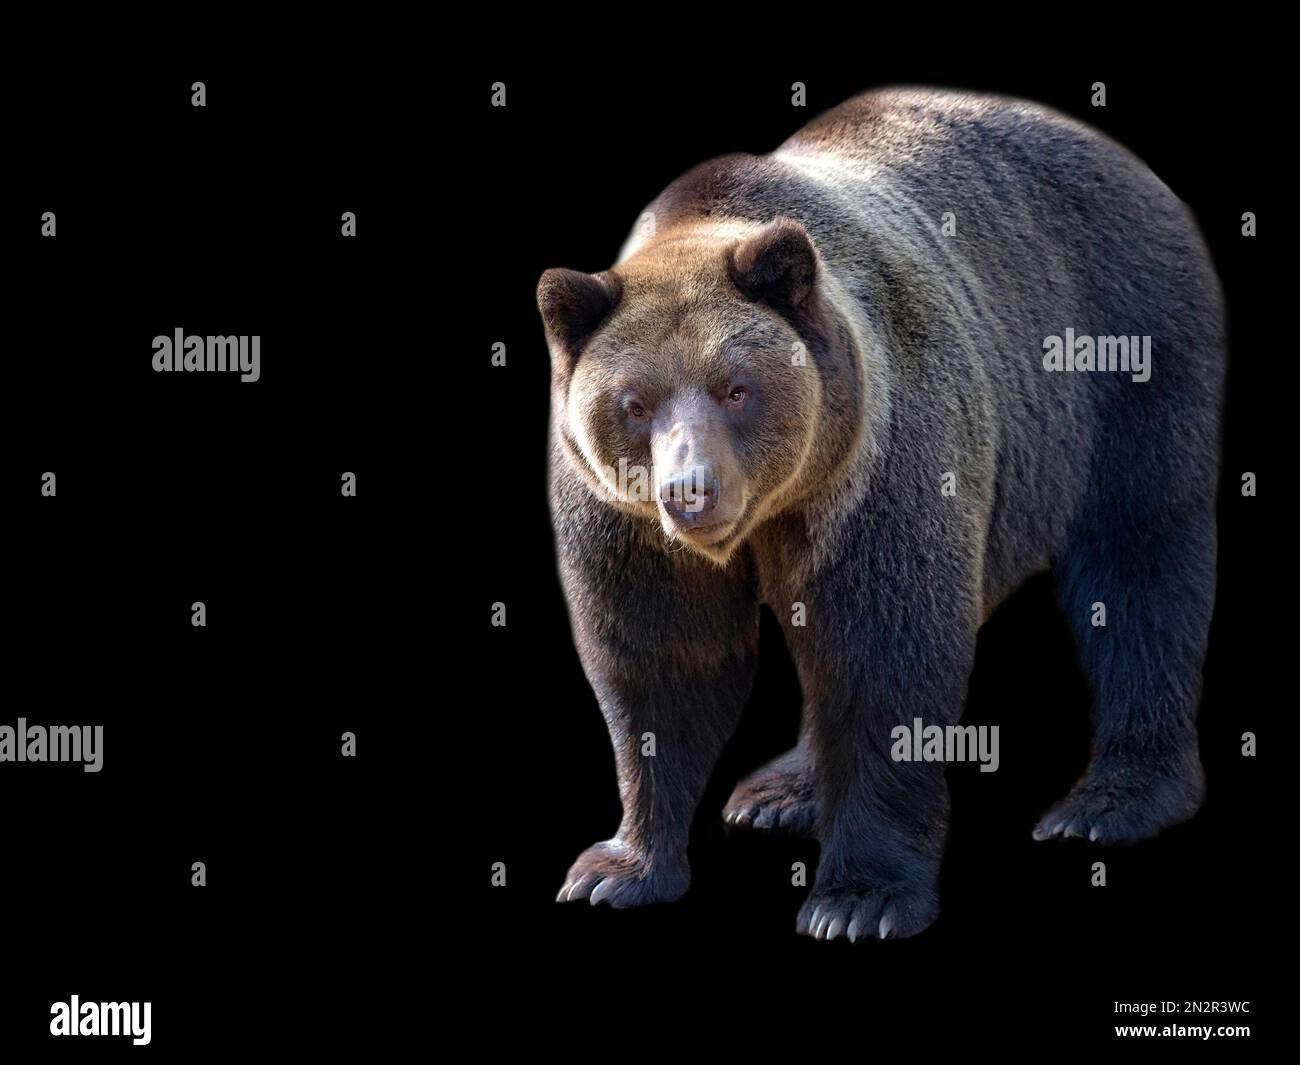 Brown bear standing on a black background Stock Photo